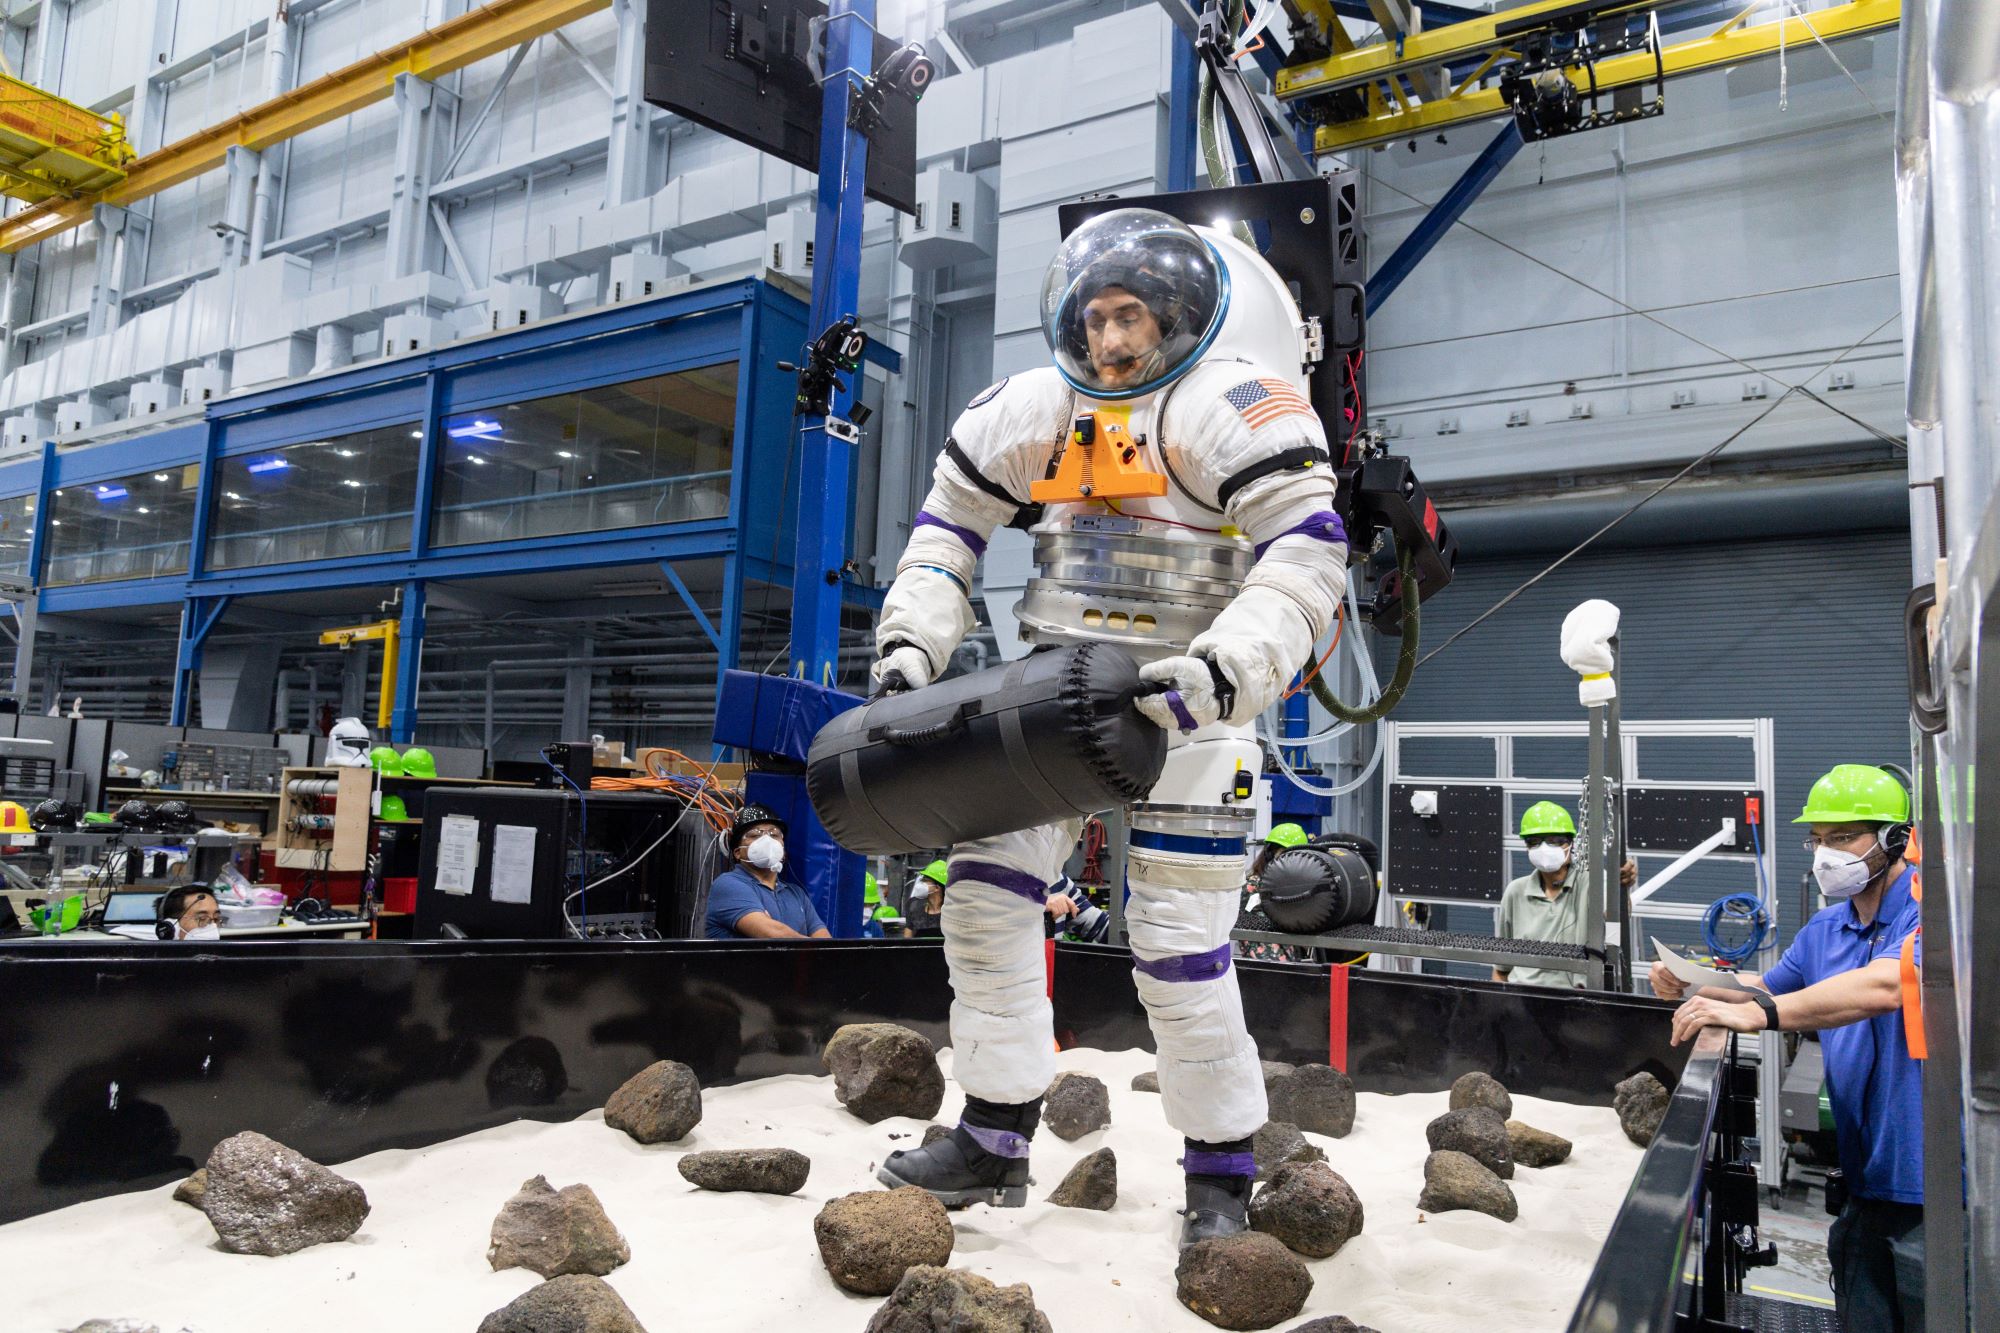 A volunteer in a spacesuit attempts a simulated Martian excursion task designed to test the abilities of astronauts before and after long stints aboard the International Space Station